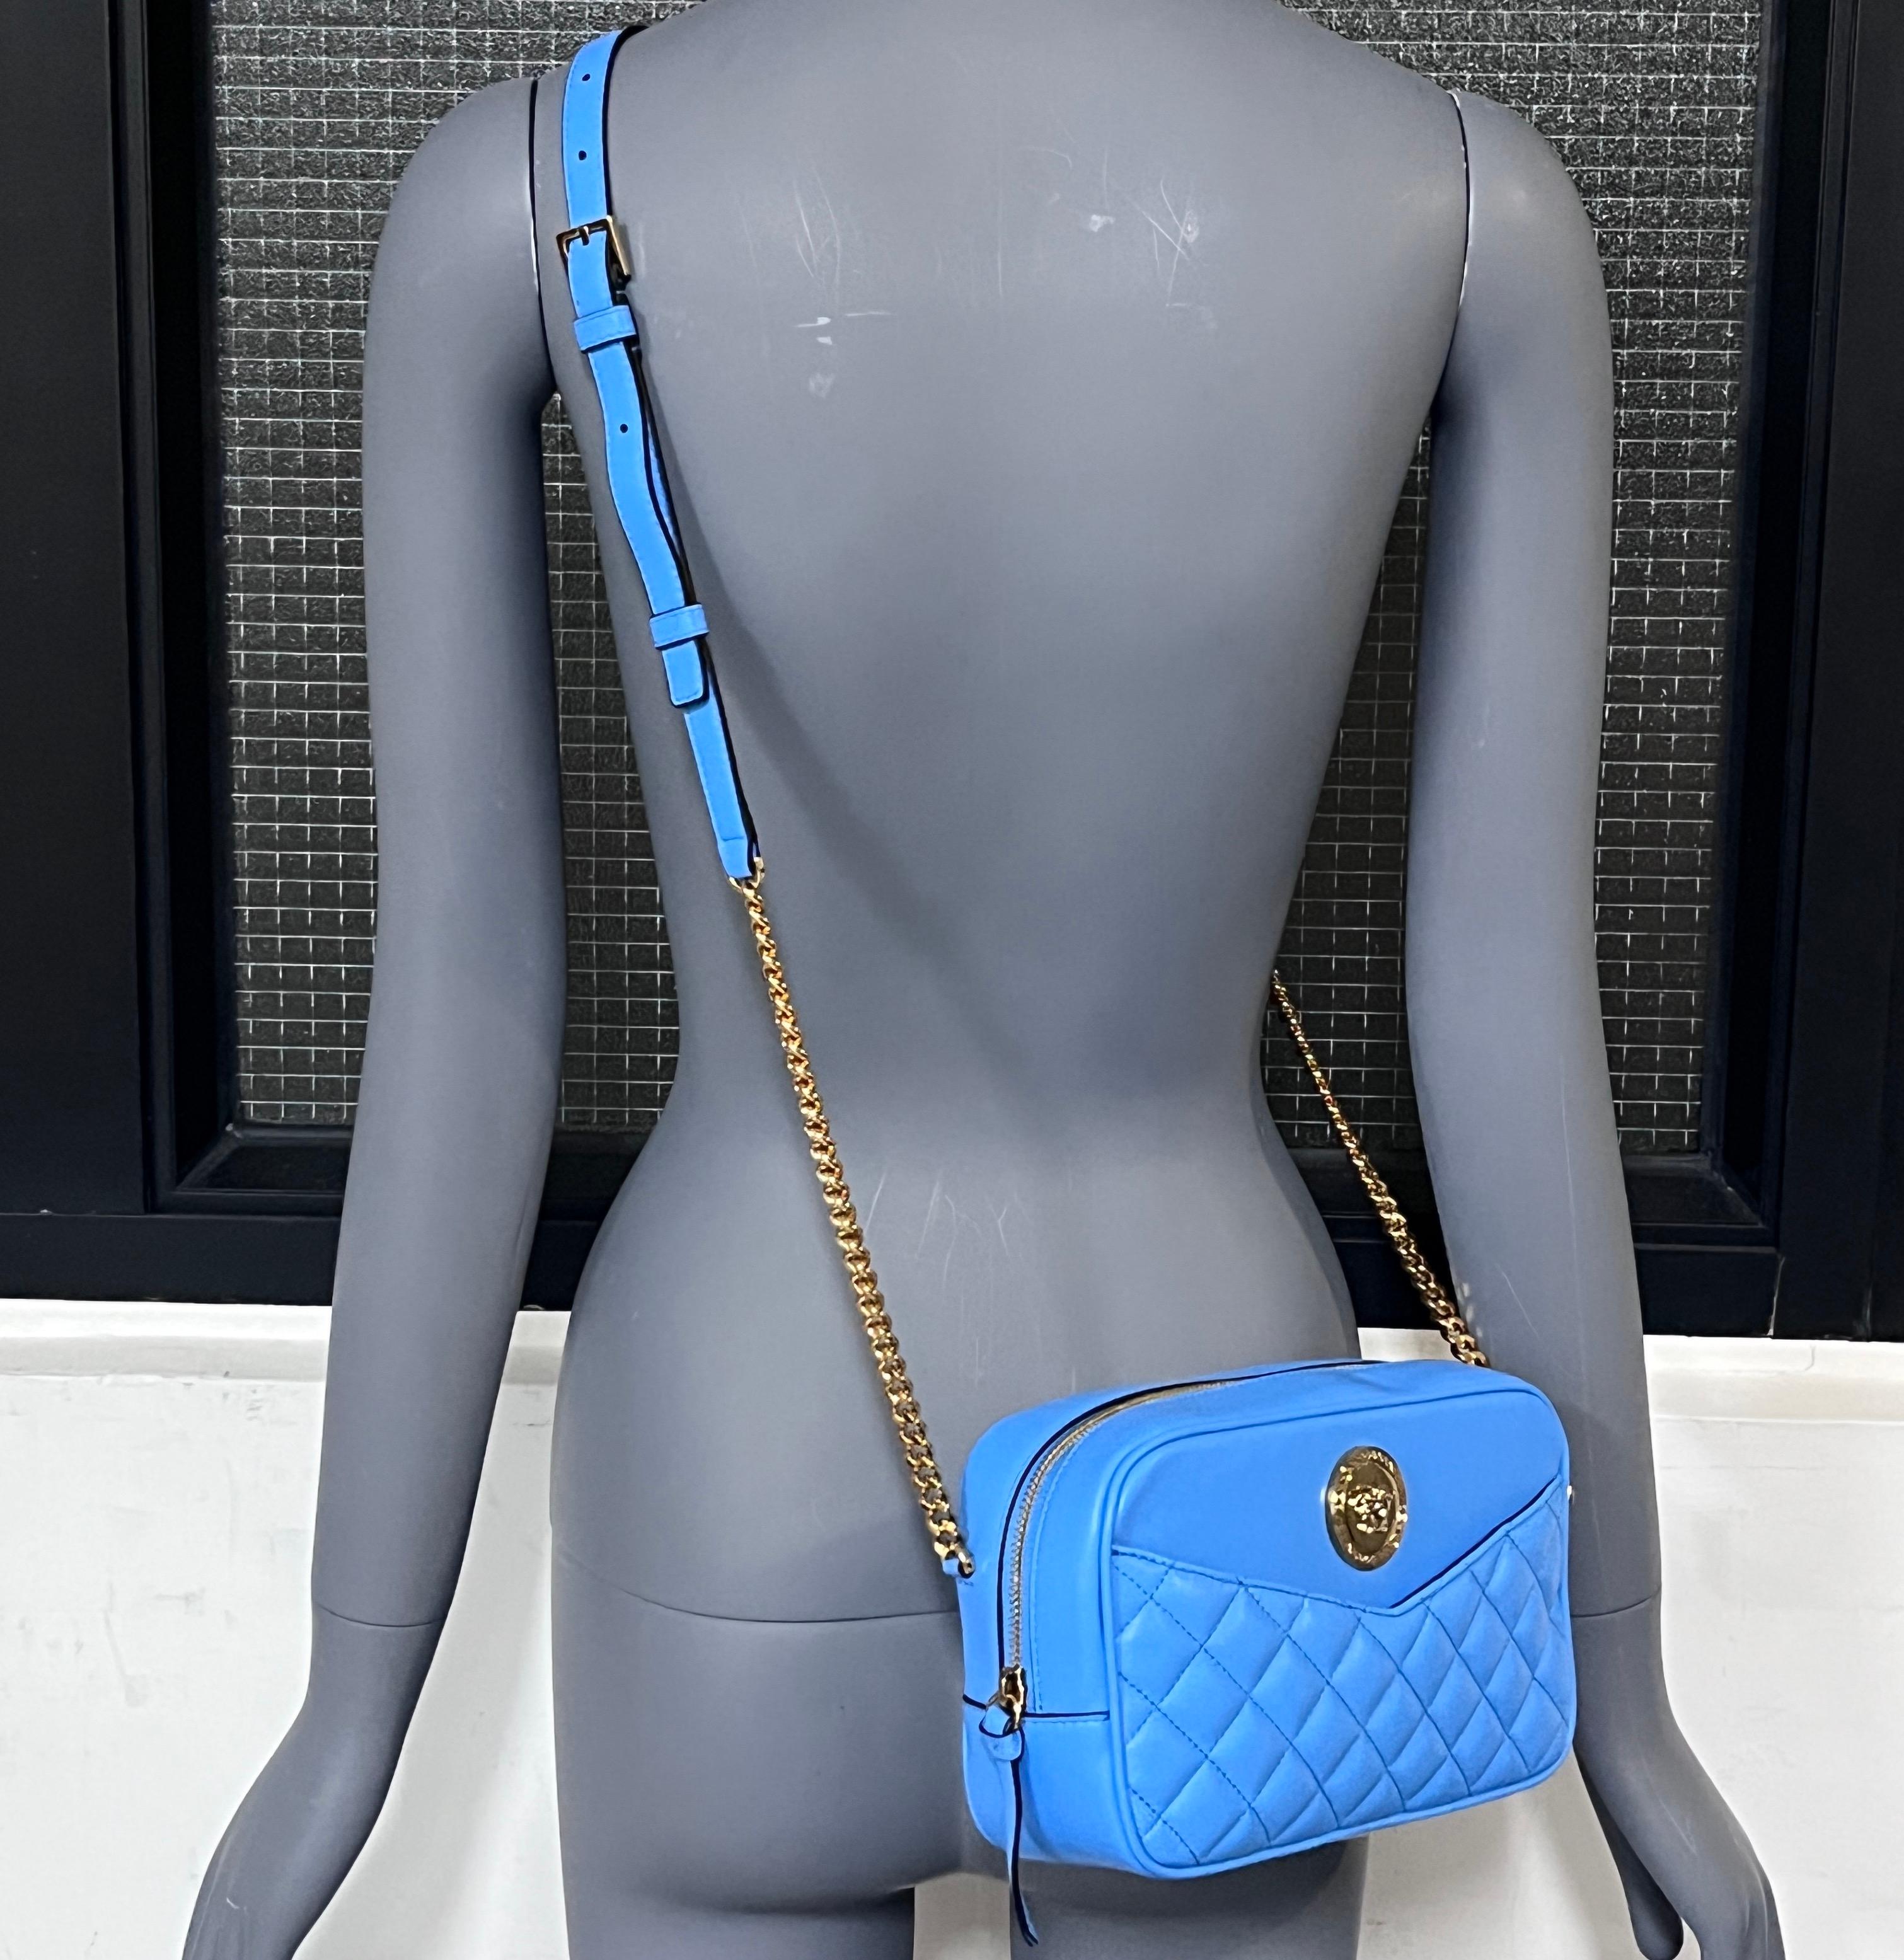 new VERSACE blue lambskin leather quilted gold Medusa chain crossbody bag Medium
Reference: TGAS/D00829
Brand: Versace
Designer: Donatella Versace
Model: 1008828 1A03912 1V57V
Collection: Tribute
Material: Lambskin Leather, Metal
Color: Blue,